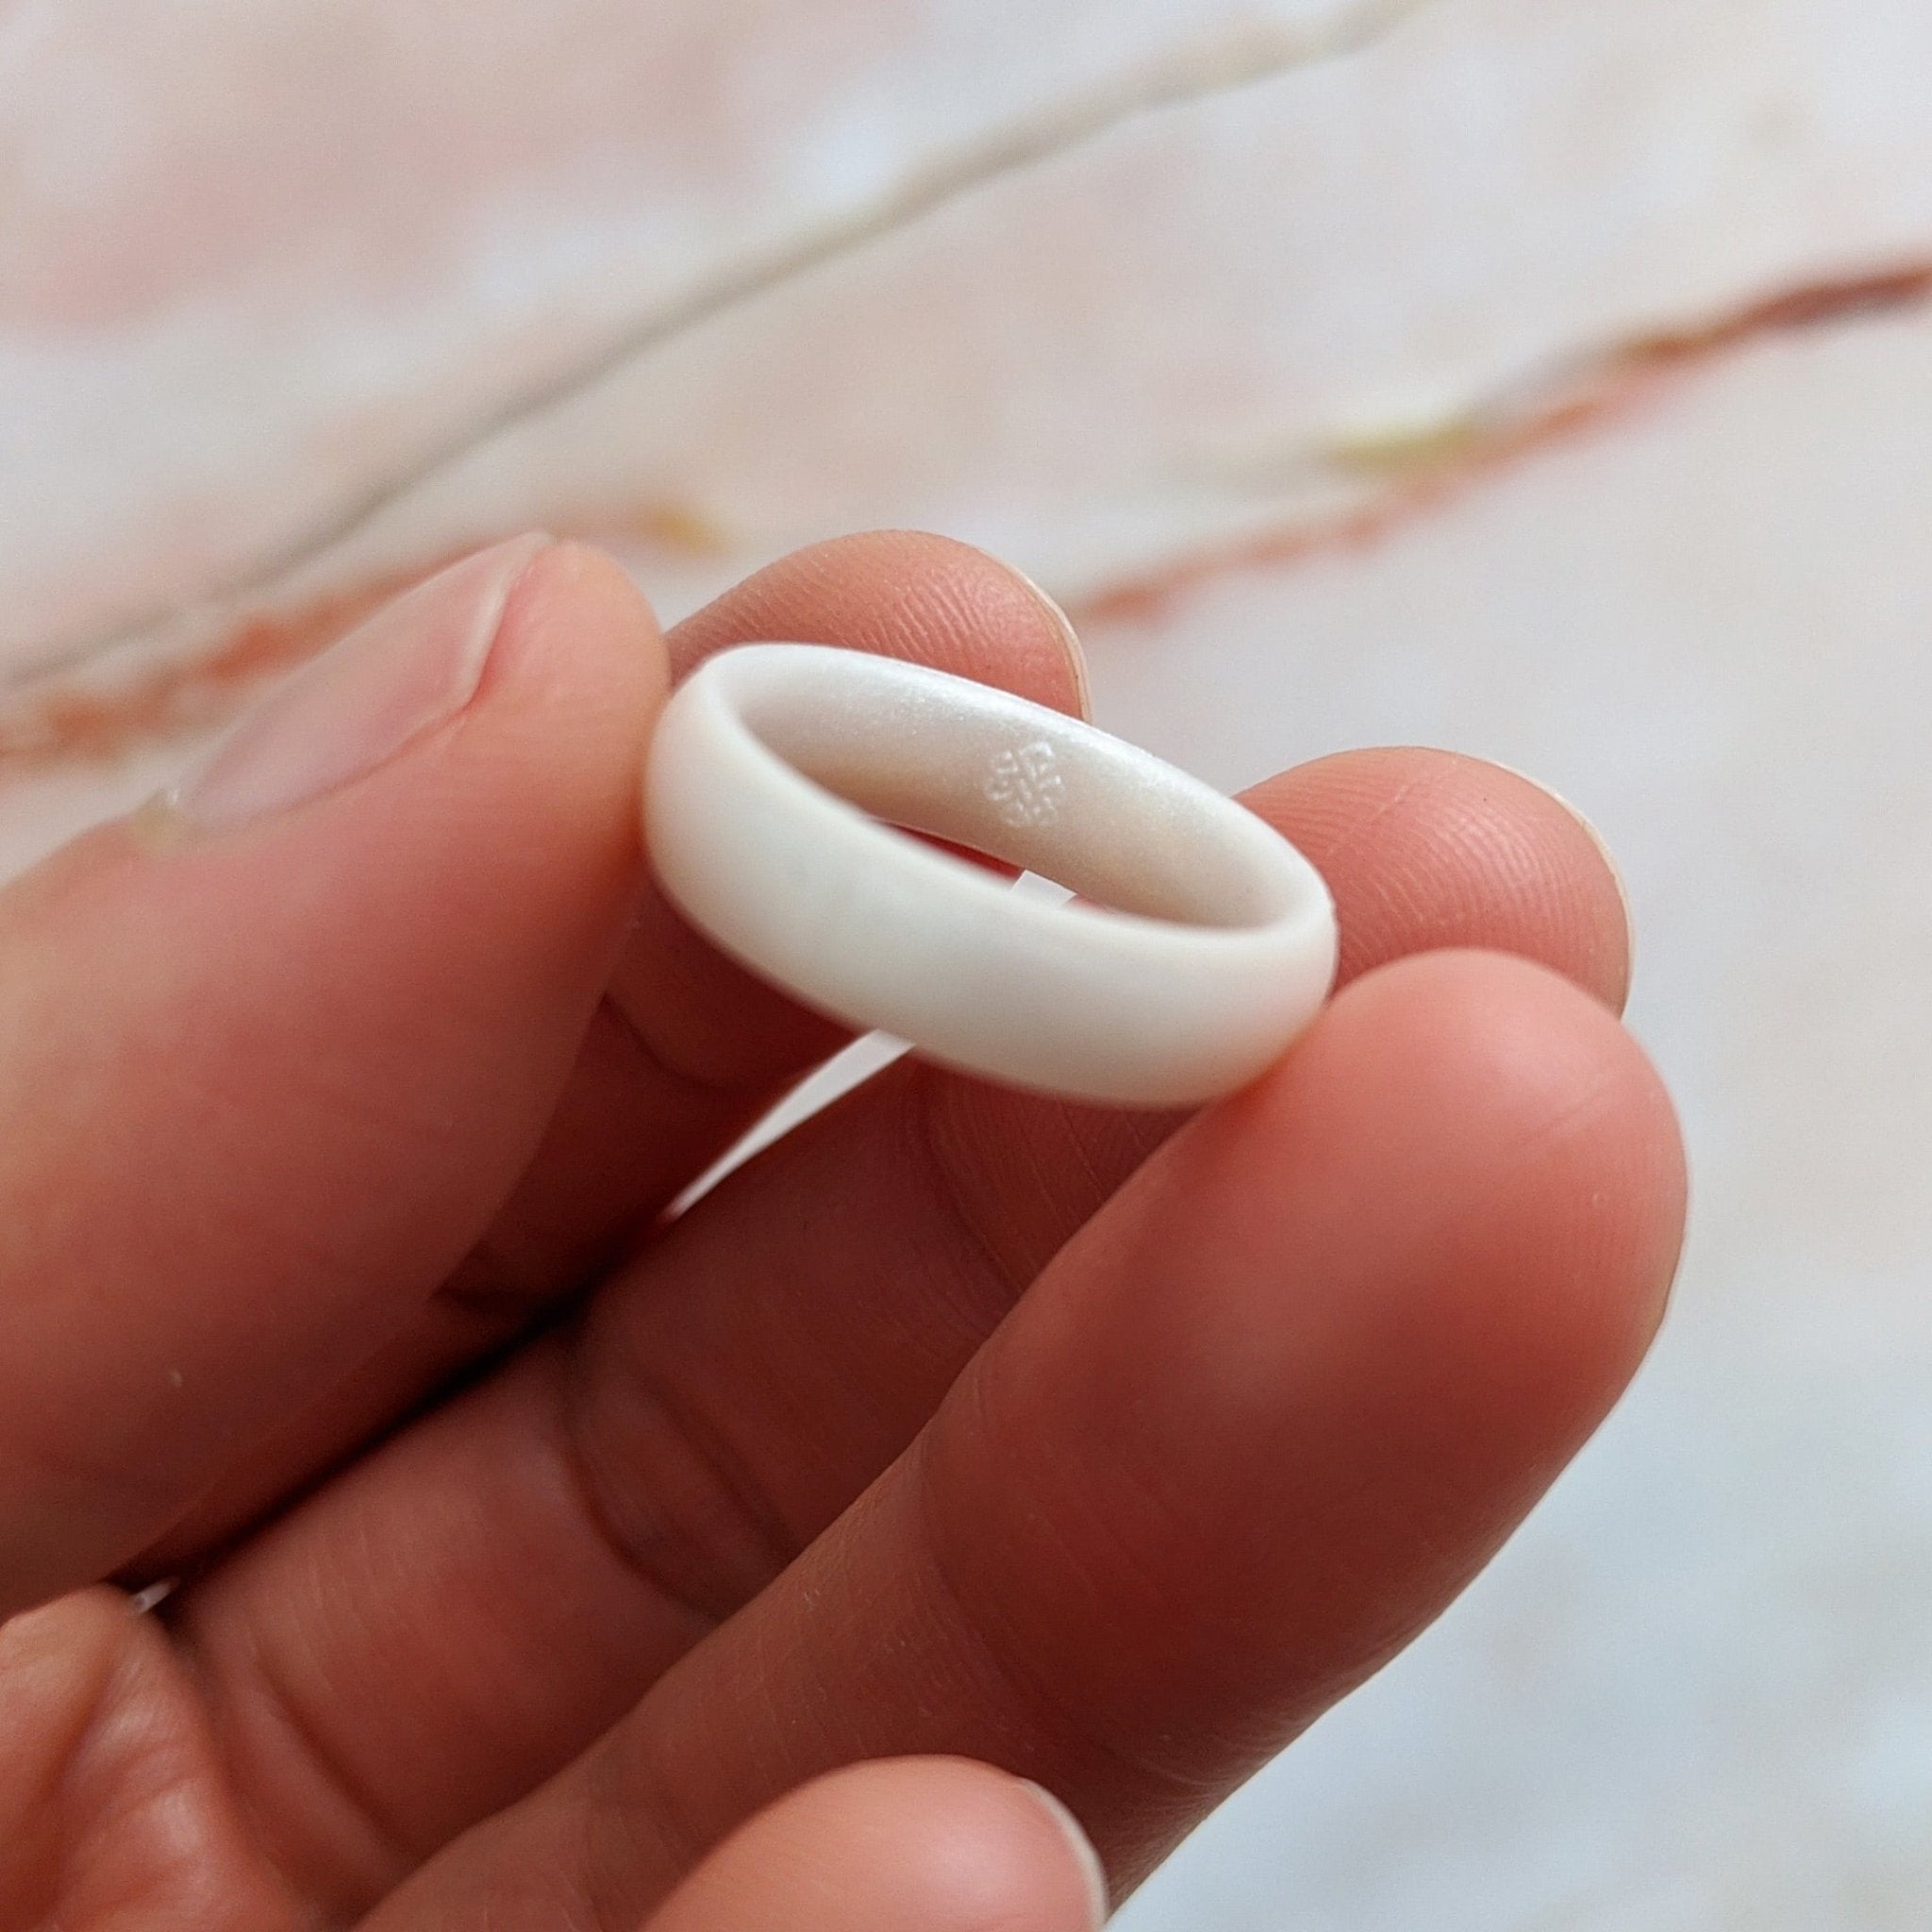 Pearl White Breathable Silicone Ring For Men and Women